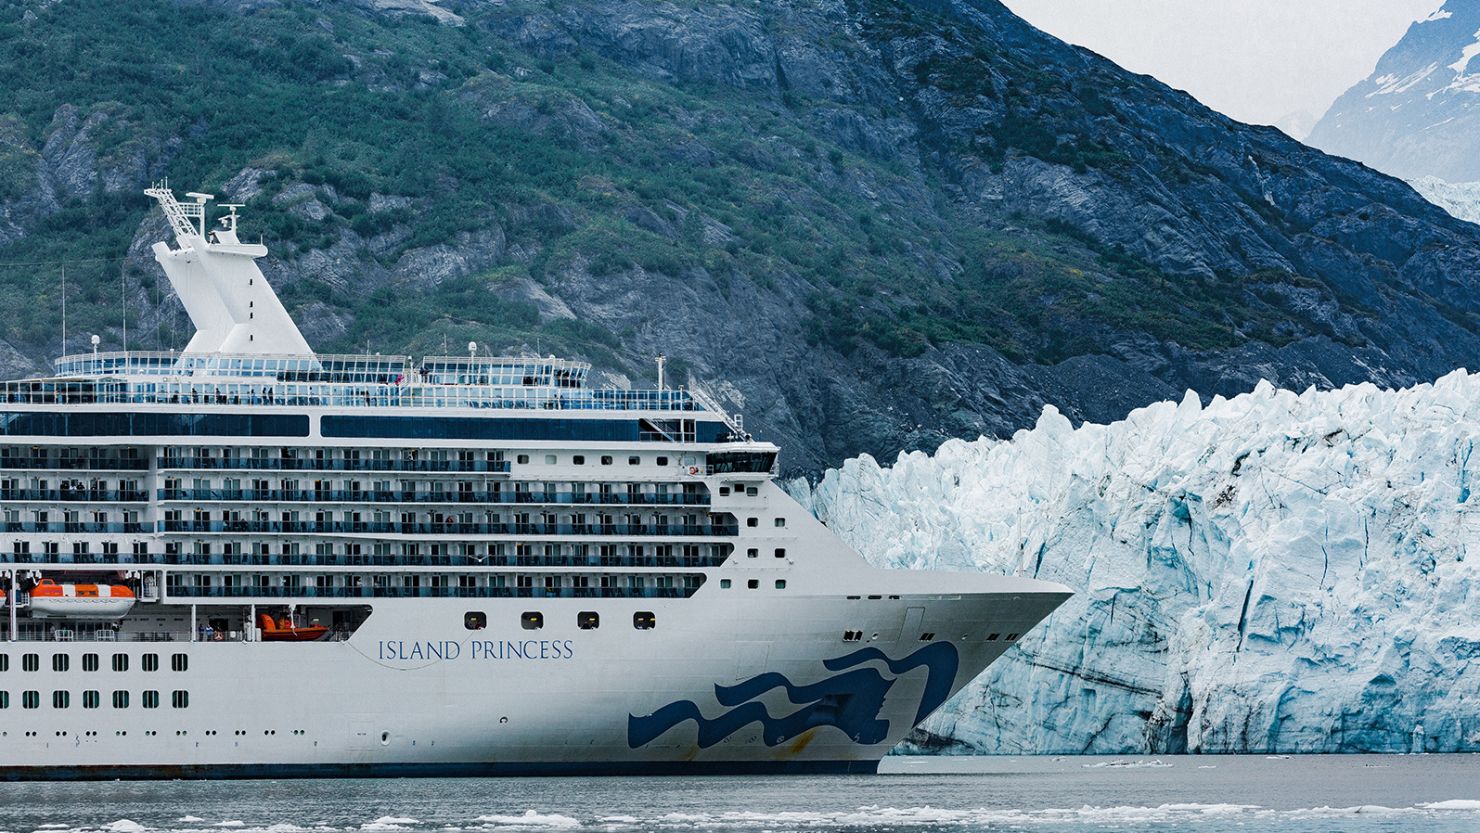 A cruise ship sails in front of Margerie Glacier in Glacier Bay, Alaska. Photo credit: Tim Rue/Bloomberg via Getty Images